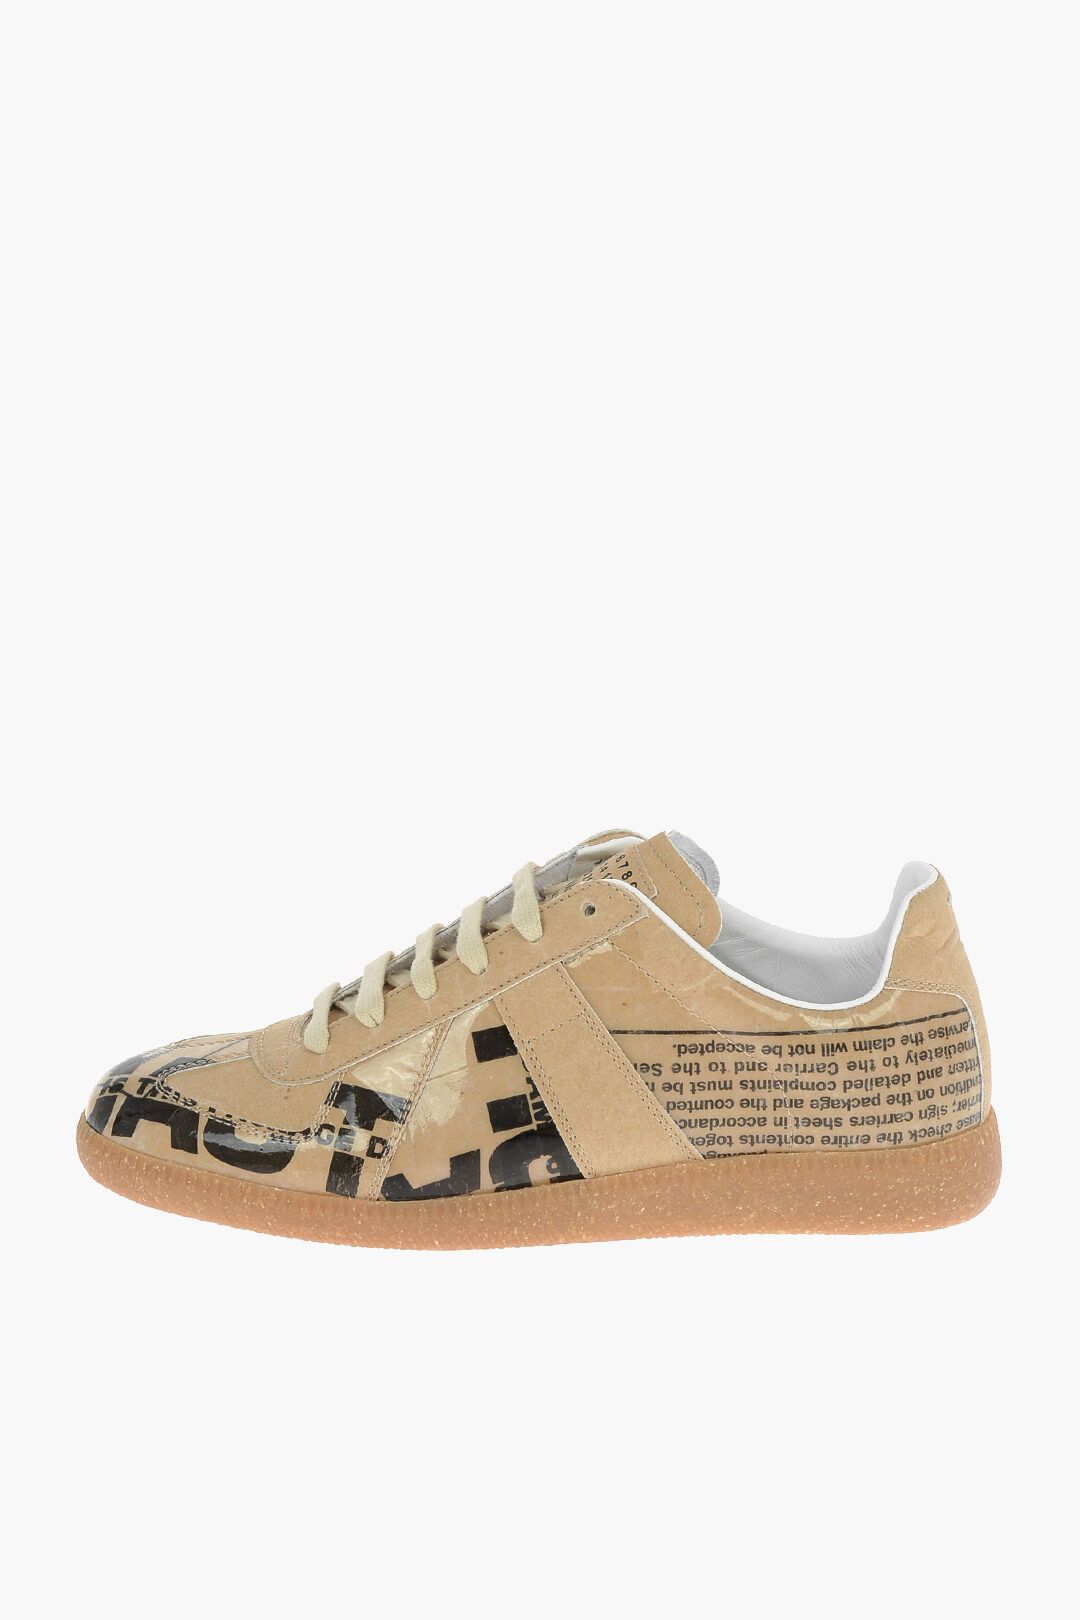 Pre-owned Maison Margiela Og1mm0424 Printed Leather Replica Sneakers In Beige